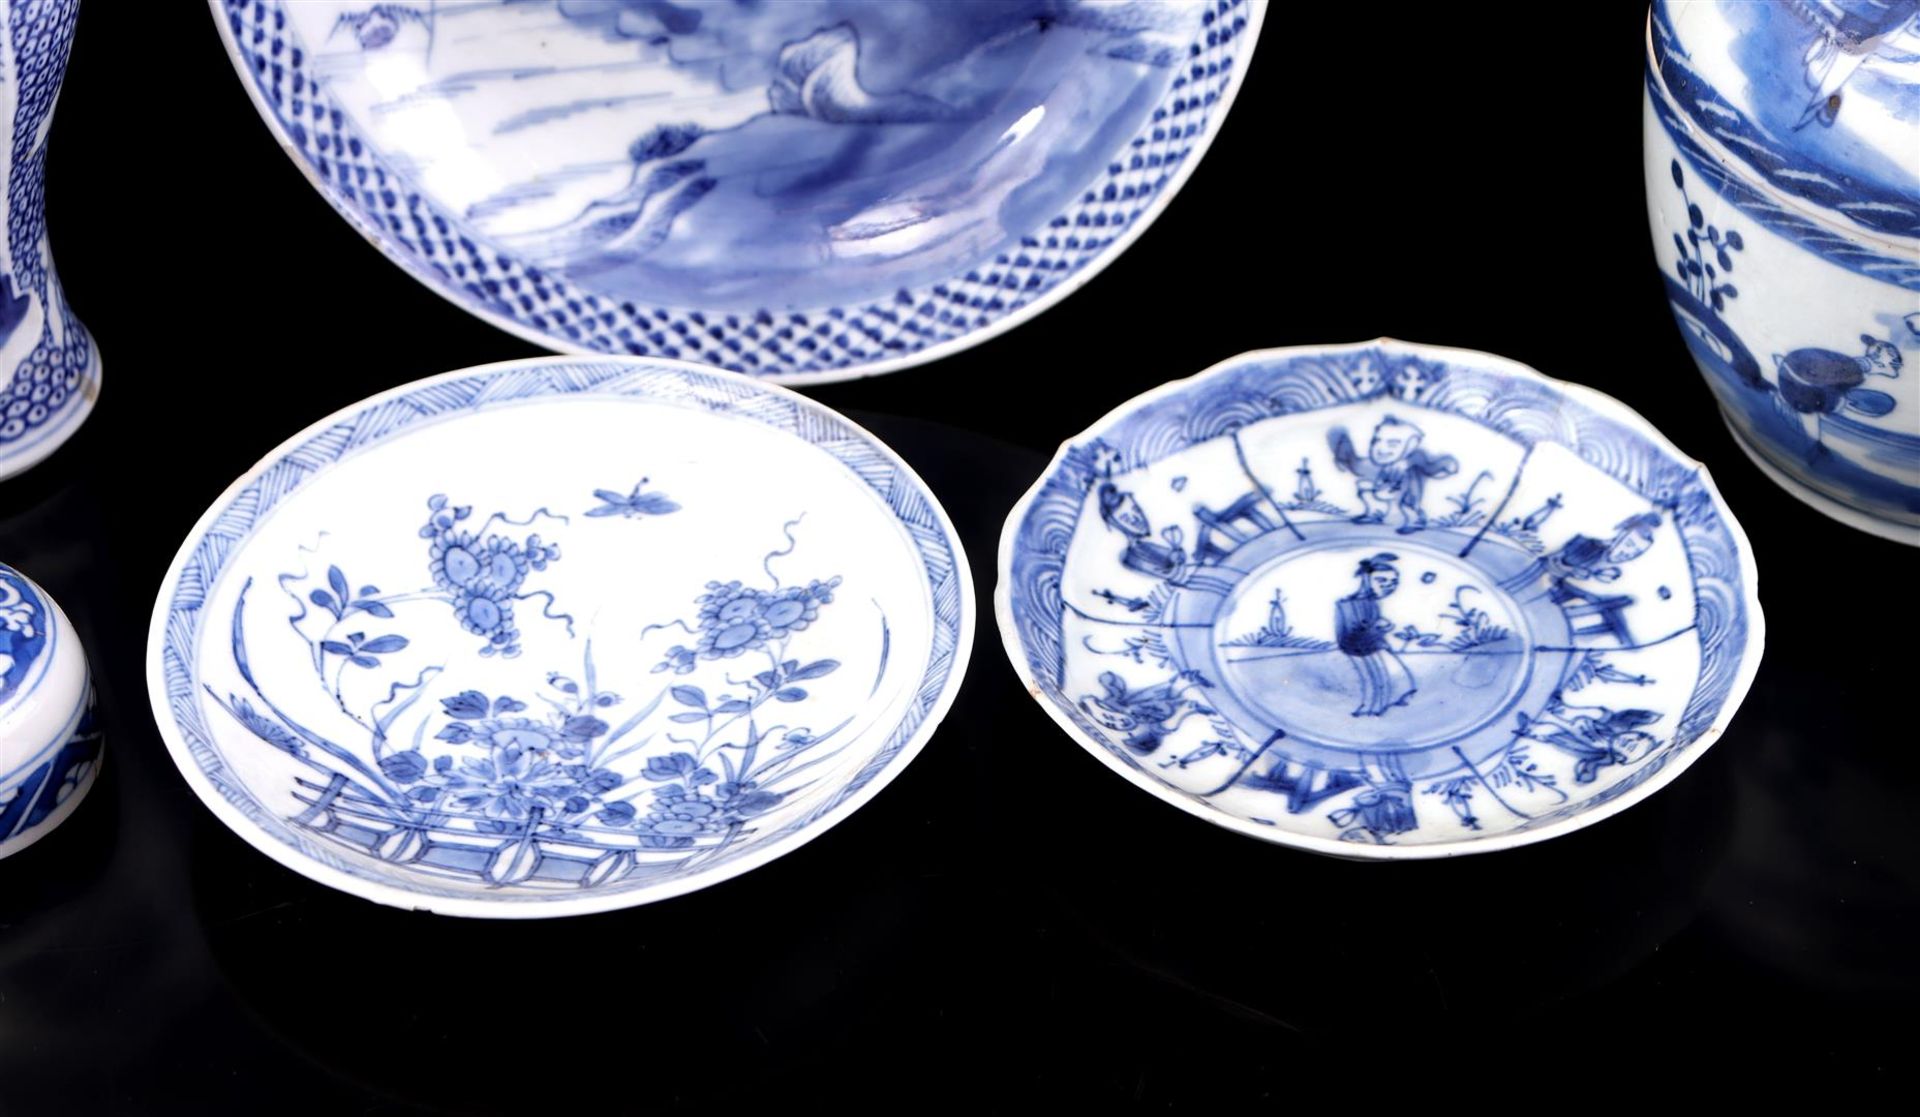 Lot of Chinese porcelain - Image 2 of 4